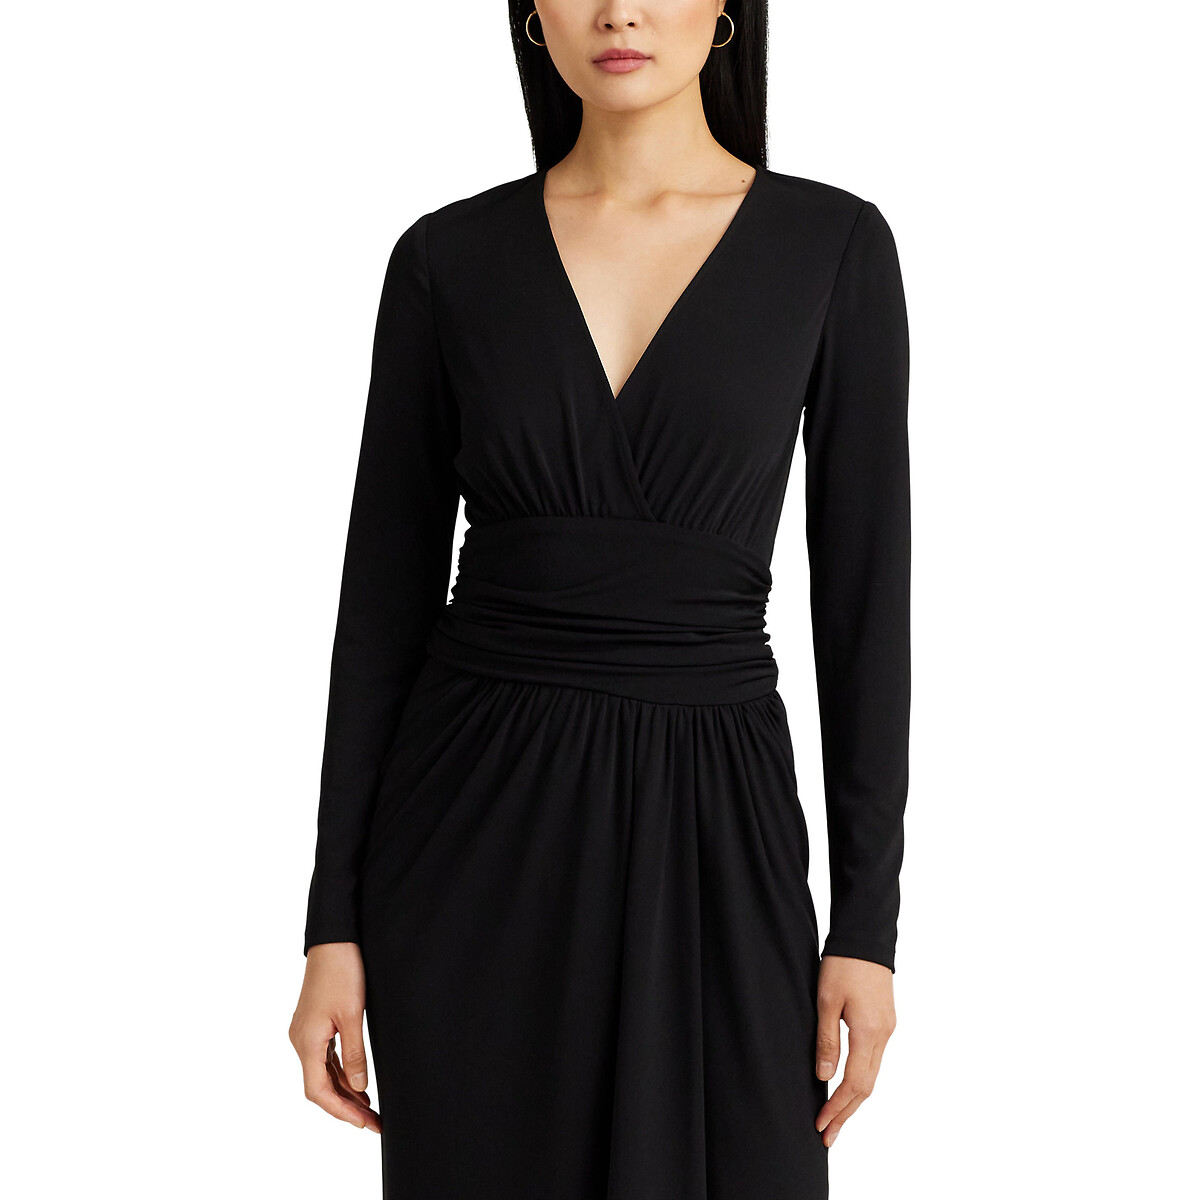 Ruthmay V-Neck Dress with Long Sleeves